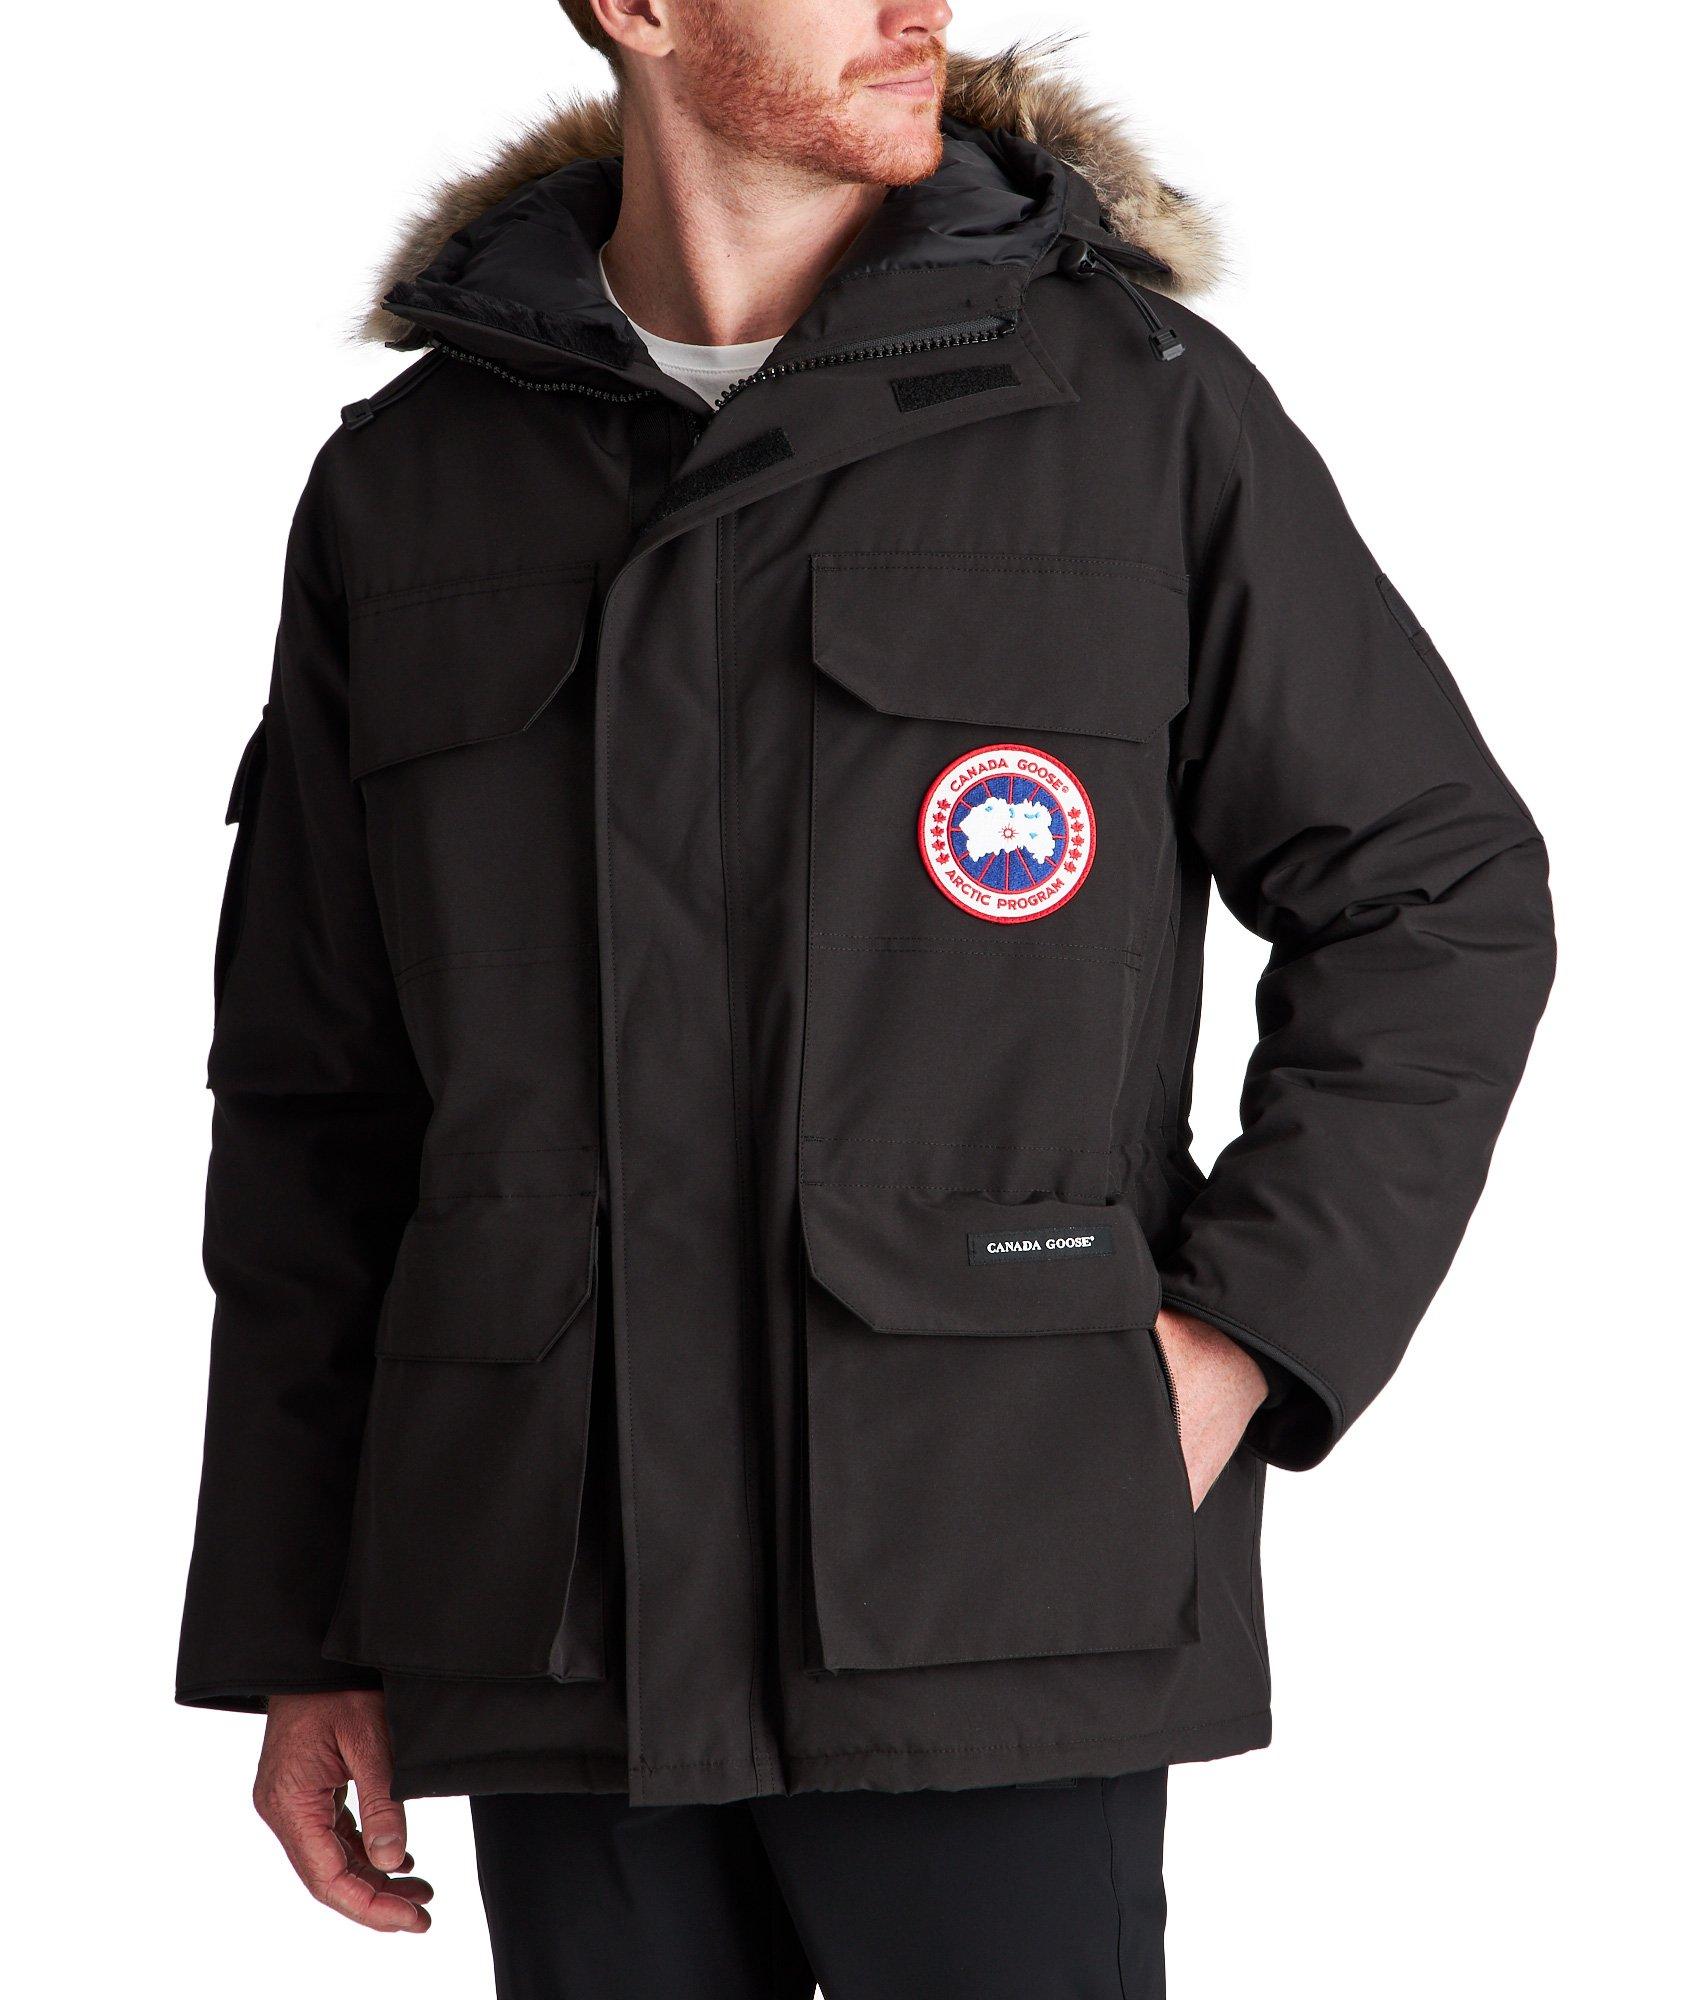 Expedition Parka Fusion Fit image 0